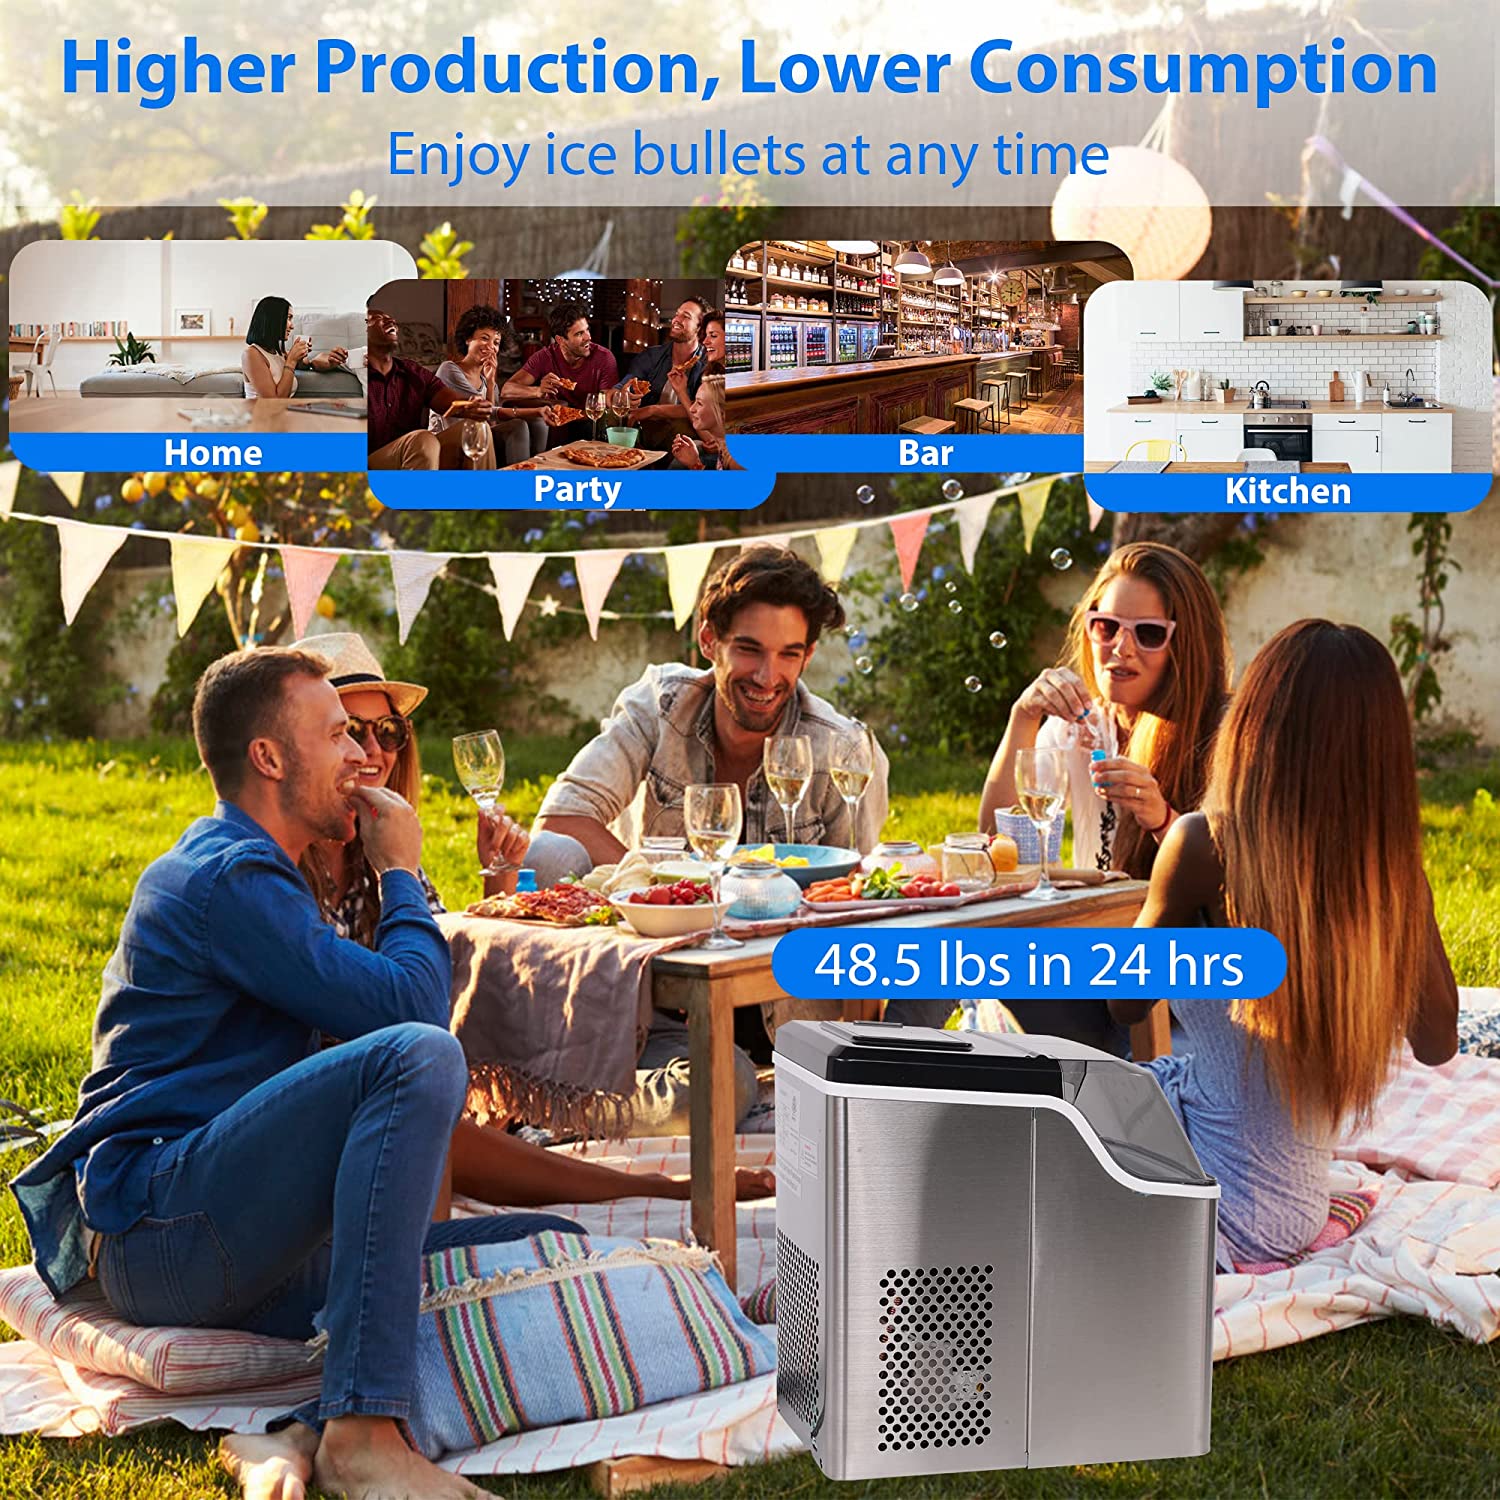 2-in-1 Water Cooler Dispenser with Built-in Ice Maker, Compact Ice  Maker Ice Scoop & Basket Self-Cleaning Timer Function